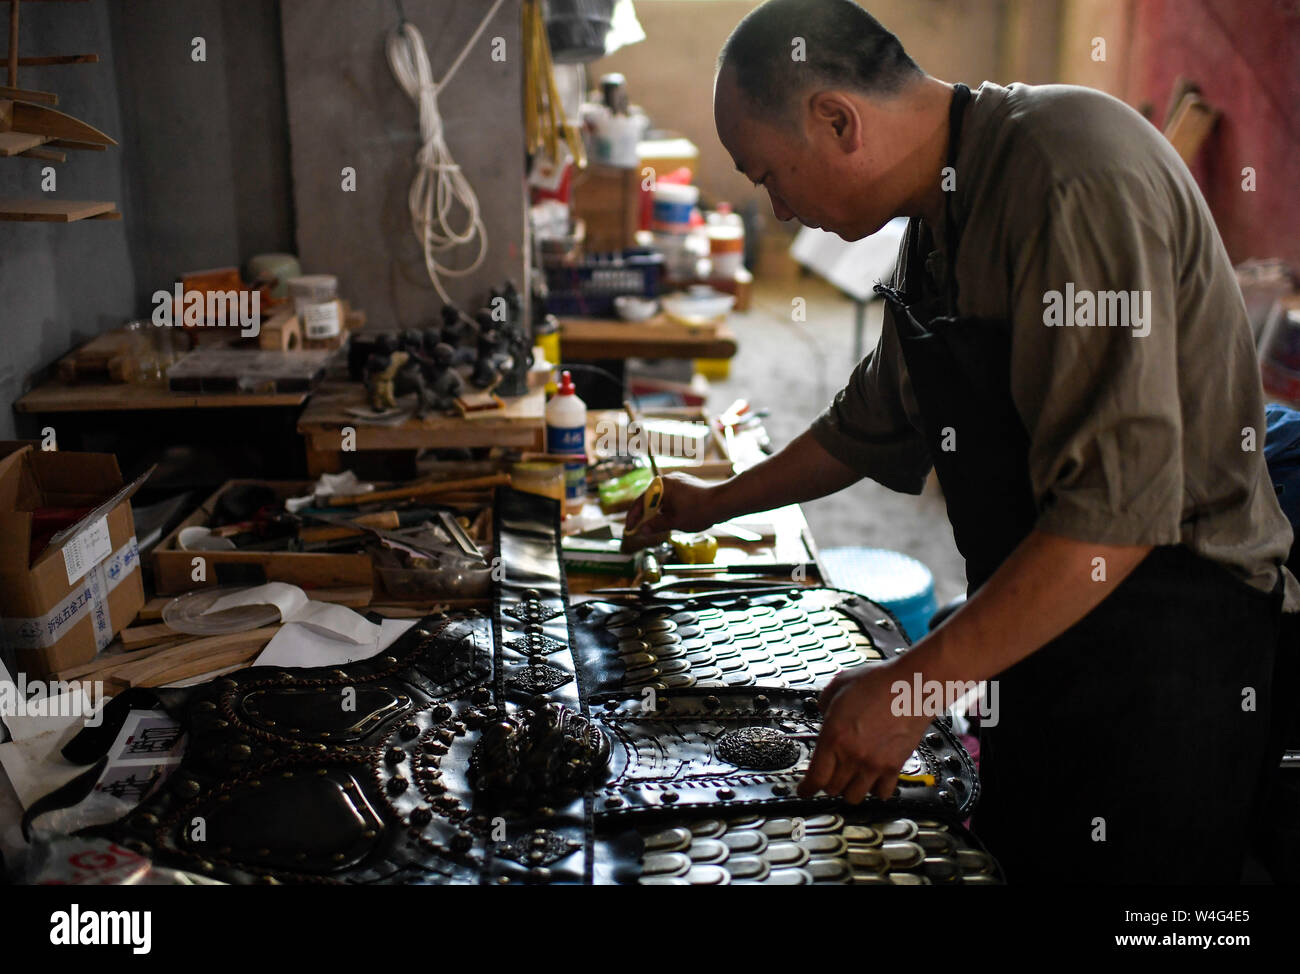 (190723) -- CHANGCHUN, July 23, 2019 (Xinhua) -- Yang Guangquan makes an armor at his studio in Changchun, capital of northeast China's Jilin Province, July 22, 2019. Yang Guangquan, a 50-year-old artisan obsessed with handicrafts, learned forging iron when he was young. He decided to make metal handicrafts in 2013, with application of old blacksmith techniques to make new creations.    After several years of running his studio, Yang has gained customer's affection for his works. He also set up a cooperative platform to develop market for handicrafts, and nearly 100 artisans involved in paper Stock Photo